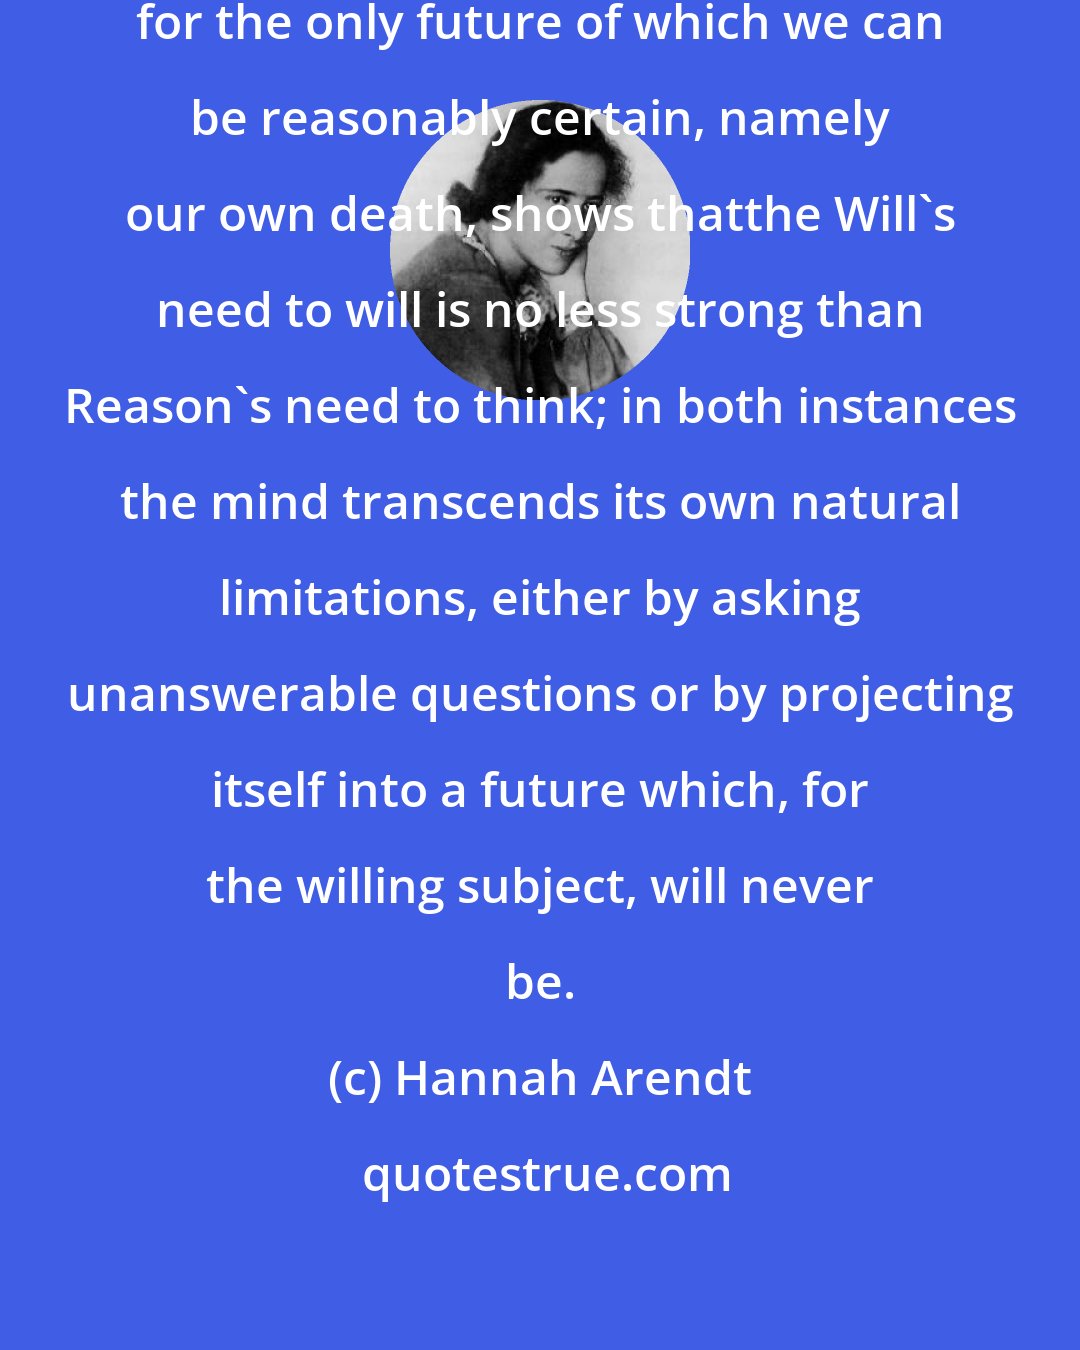 Hannah Arendt: Our Last Will and Testament, providing for the only future of which we can be reasonably certain, namely our own death, shows thatthe Will's need to will is no less strong than Reason's need to think; in both instances the mind transcends its own natural limitations, either by asking unanswerable questions or by projecting itself into a future which, for the willing subject, will never be.